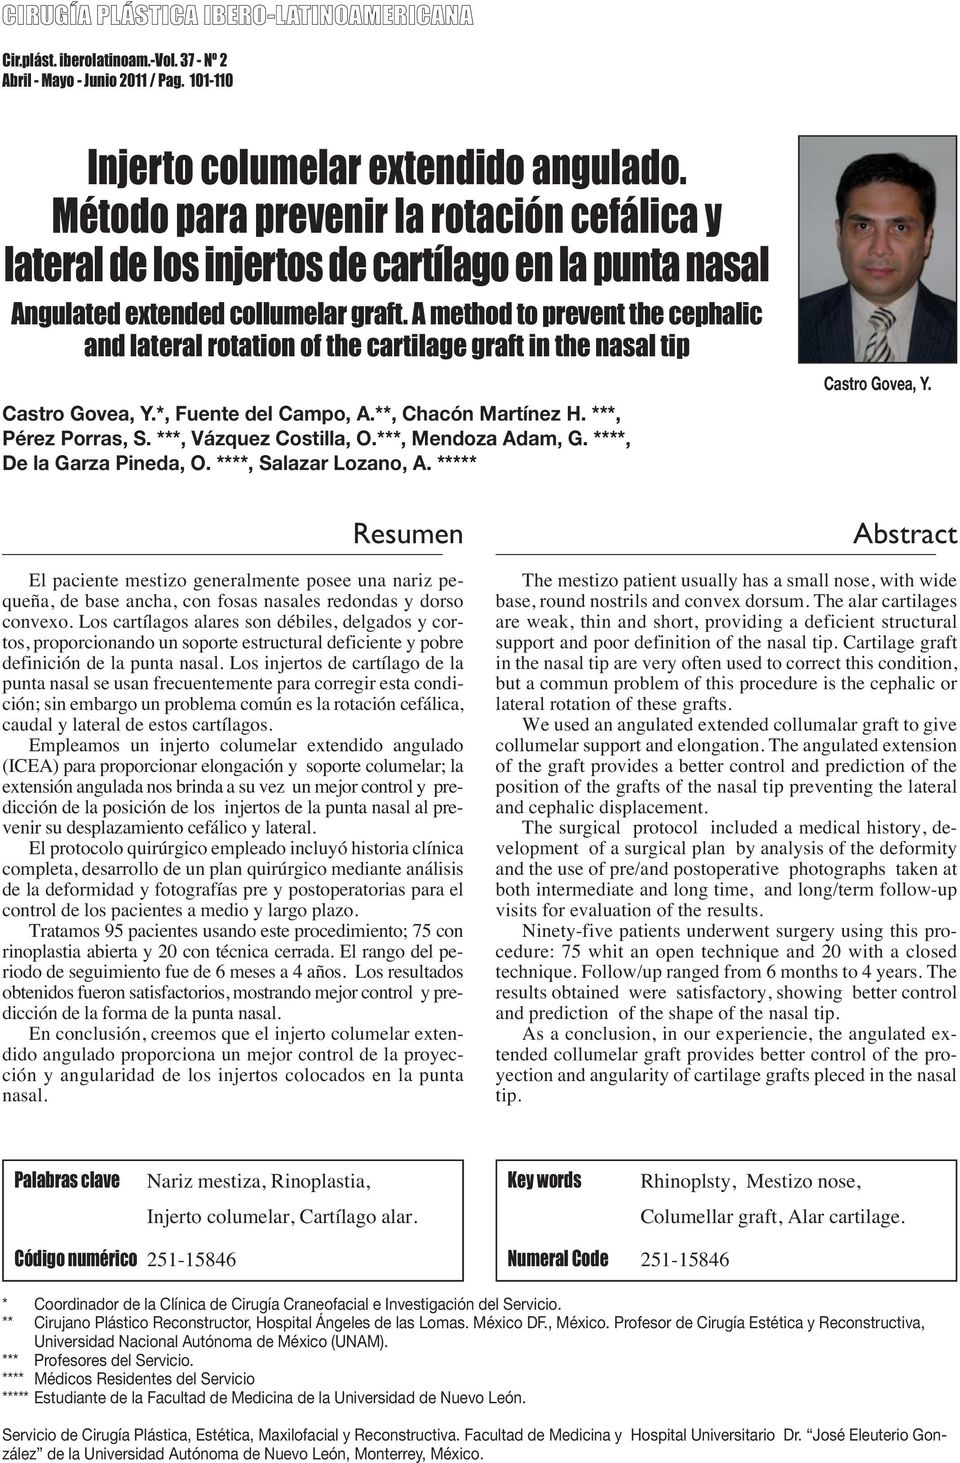 A method to prevent the cephalic and lateral rotation of the cartilage graft in the nasal tip Castro Govea, Y.*, Fuente del Campo, A.**, Chacón Martínez H. ***, Pérez Porras, S.